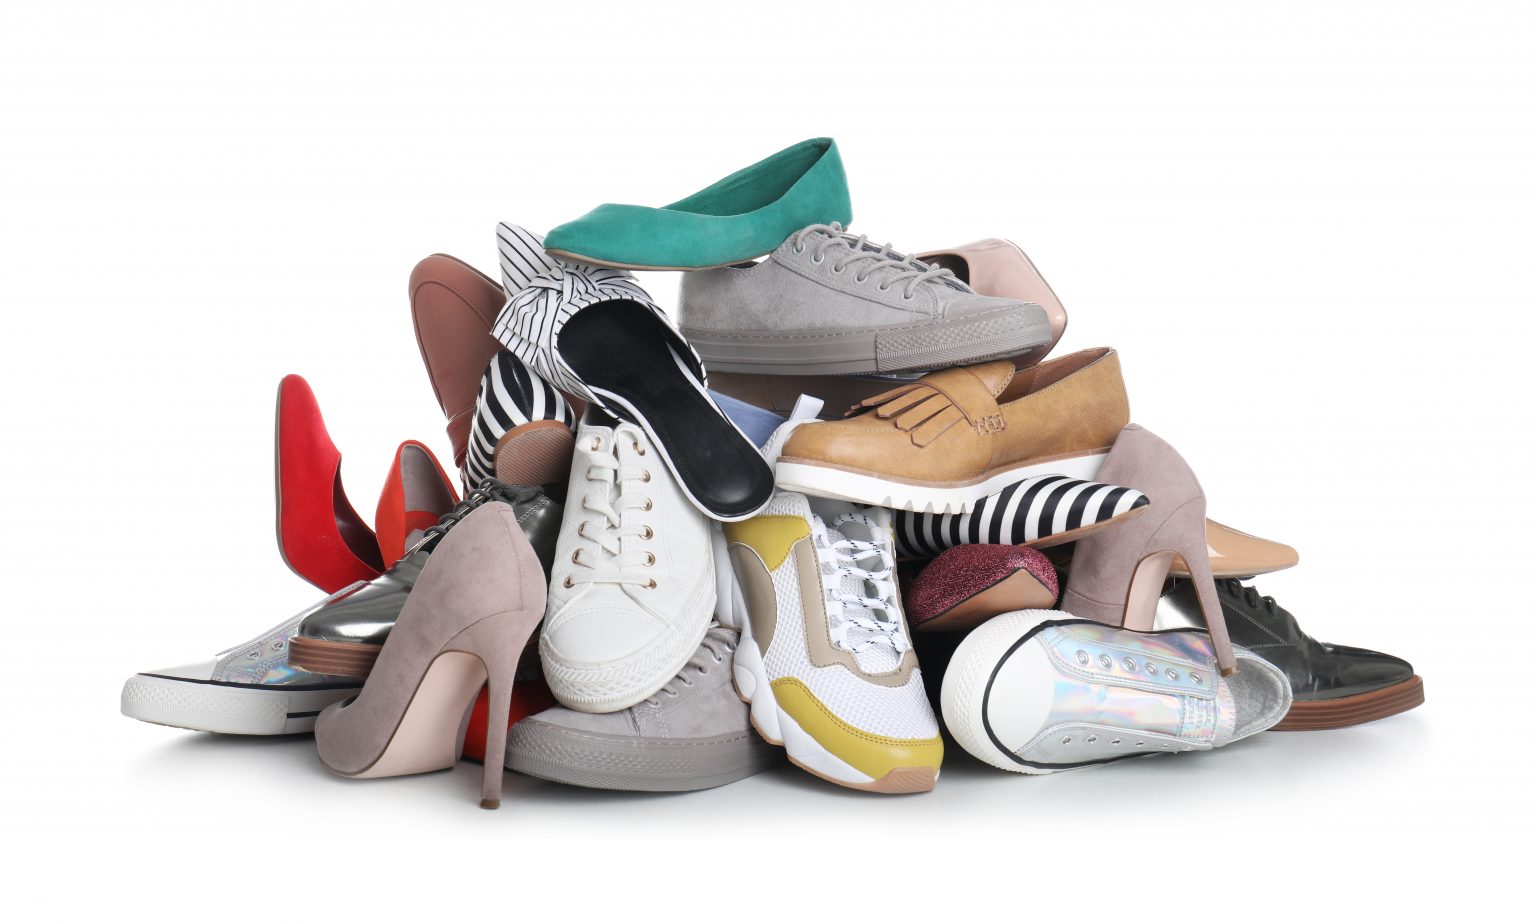 Fourth annual shoe drive to benefit locals in need - The Sun Newspapers